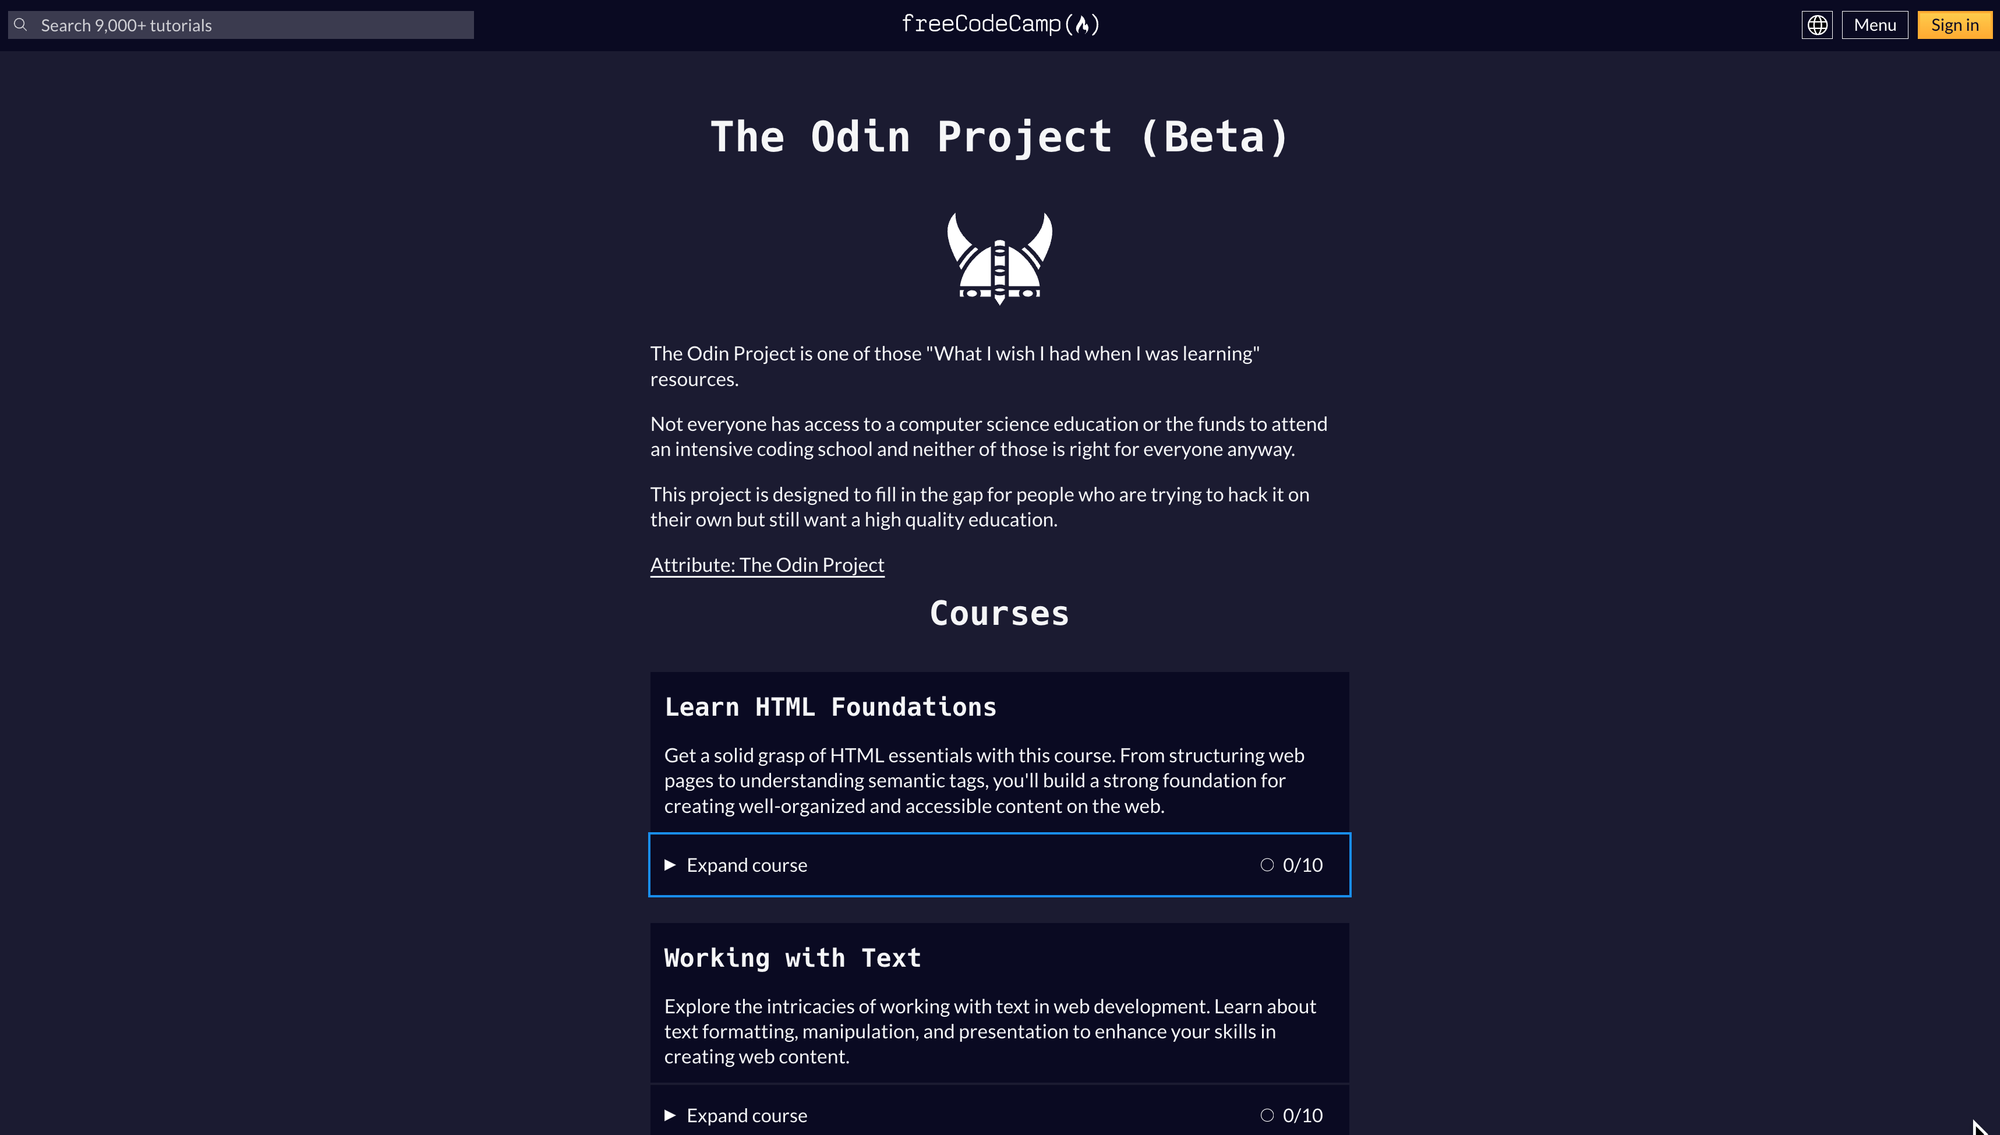 Cursor_and_The_Odin_Project__Beta____freeCodeCamp_org_--